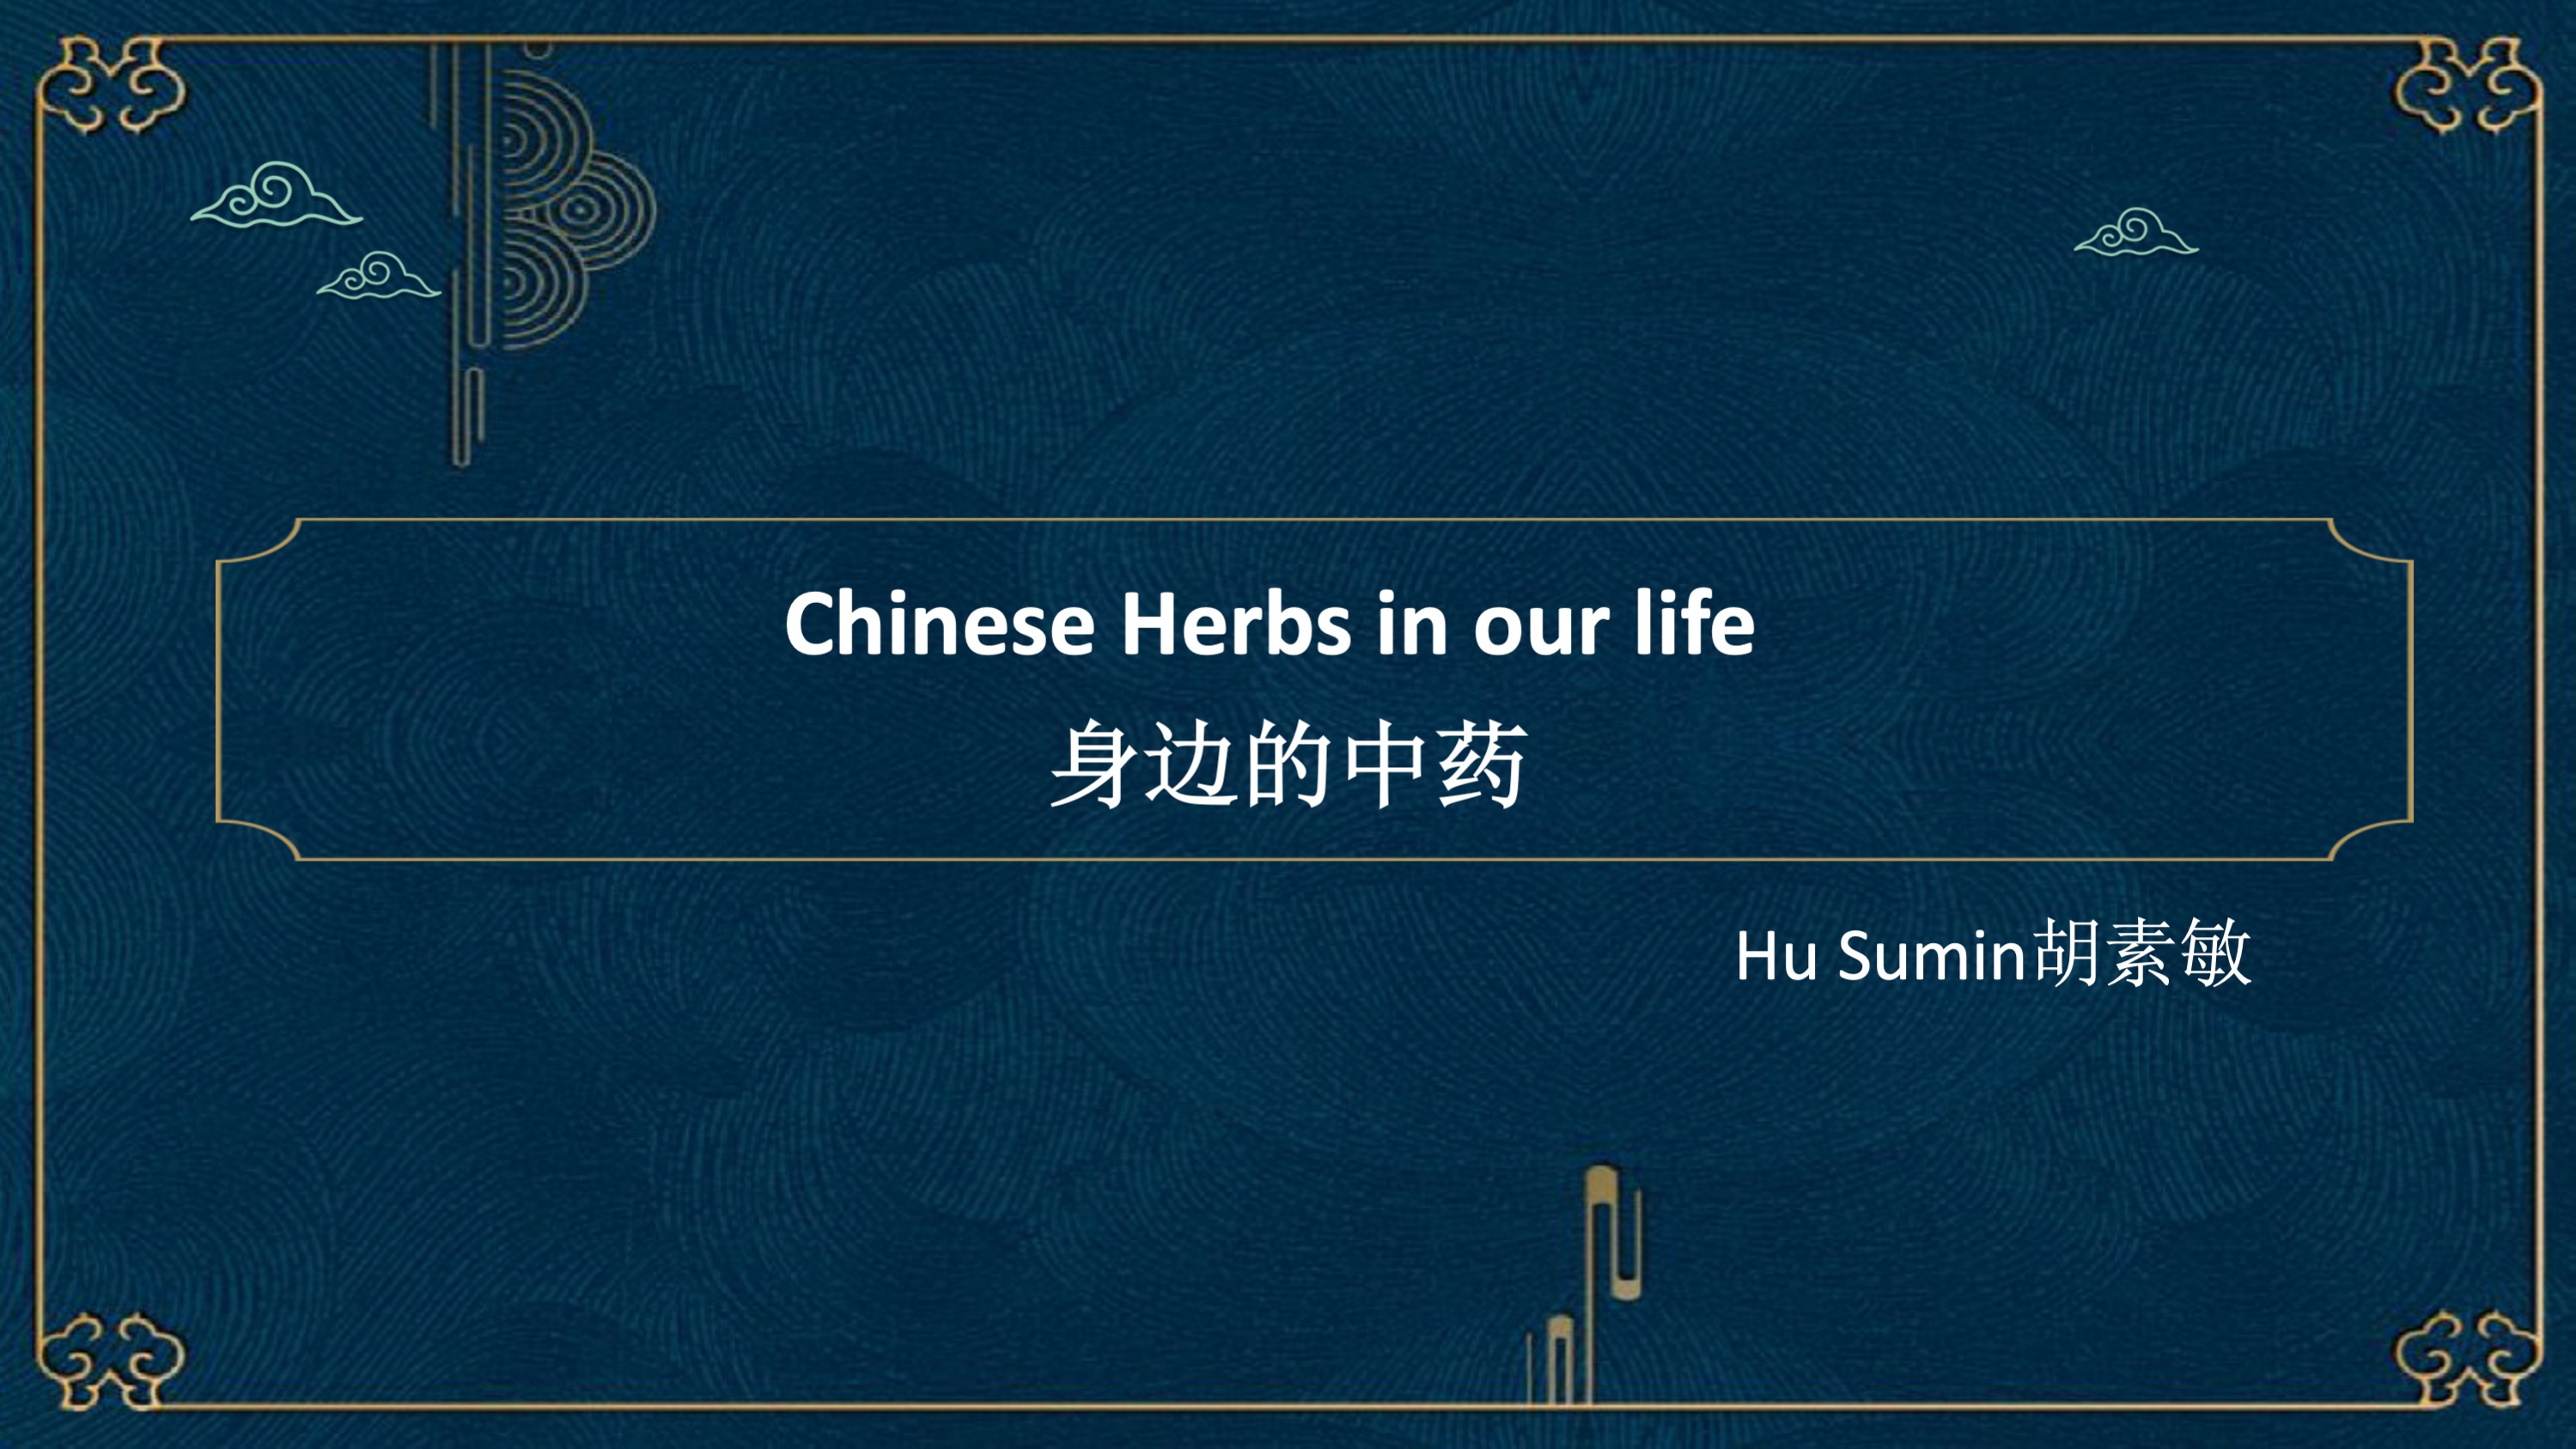 Chinese Herbs in our life